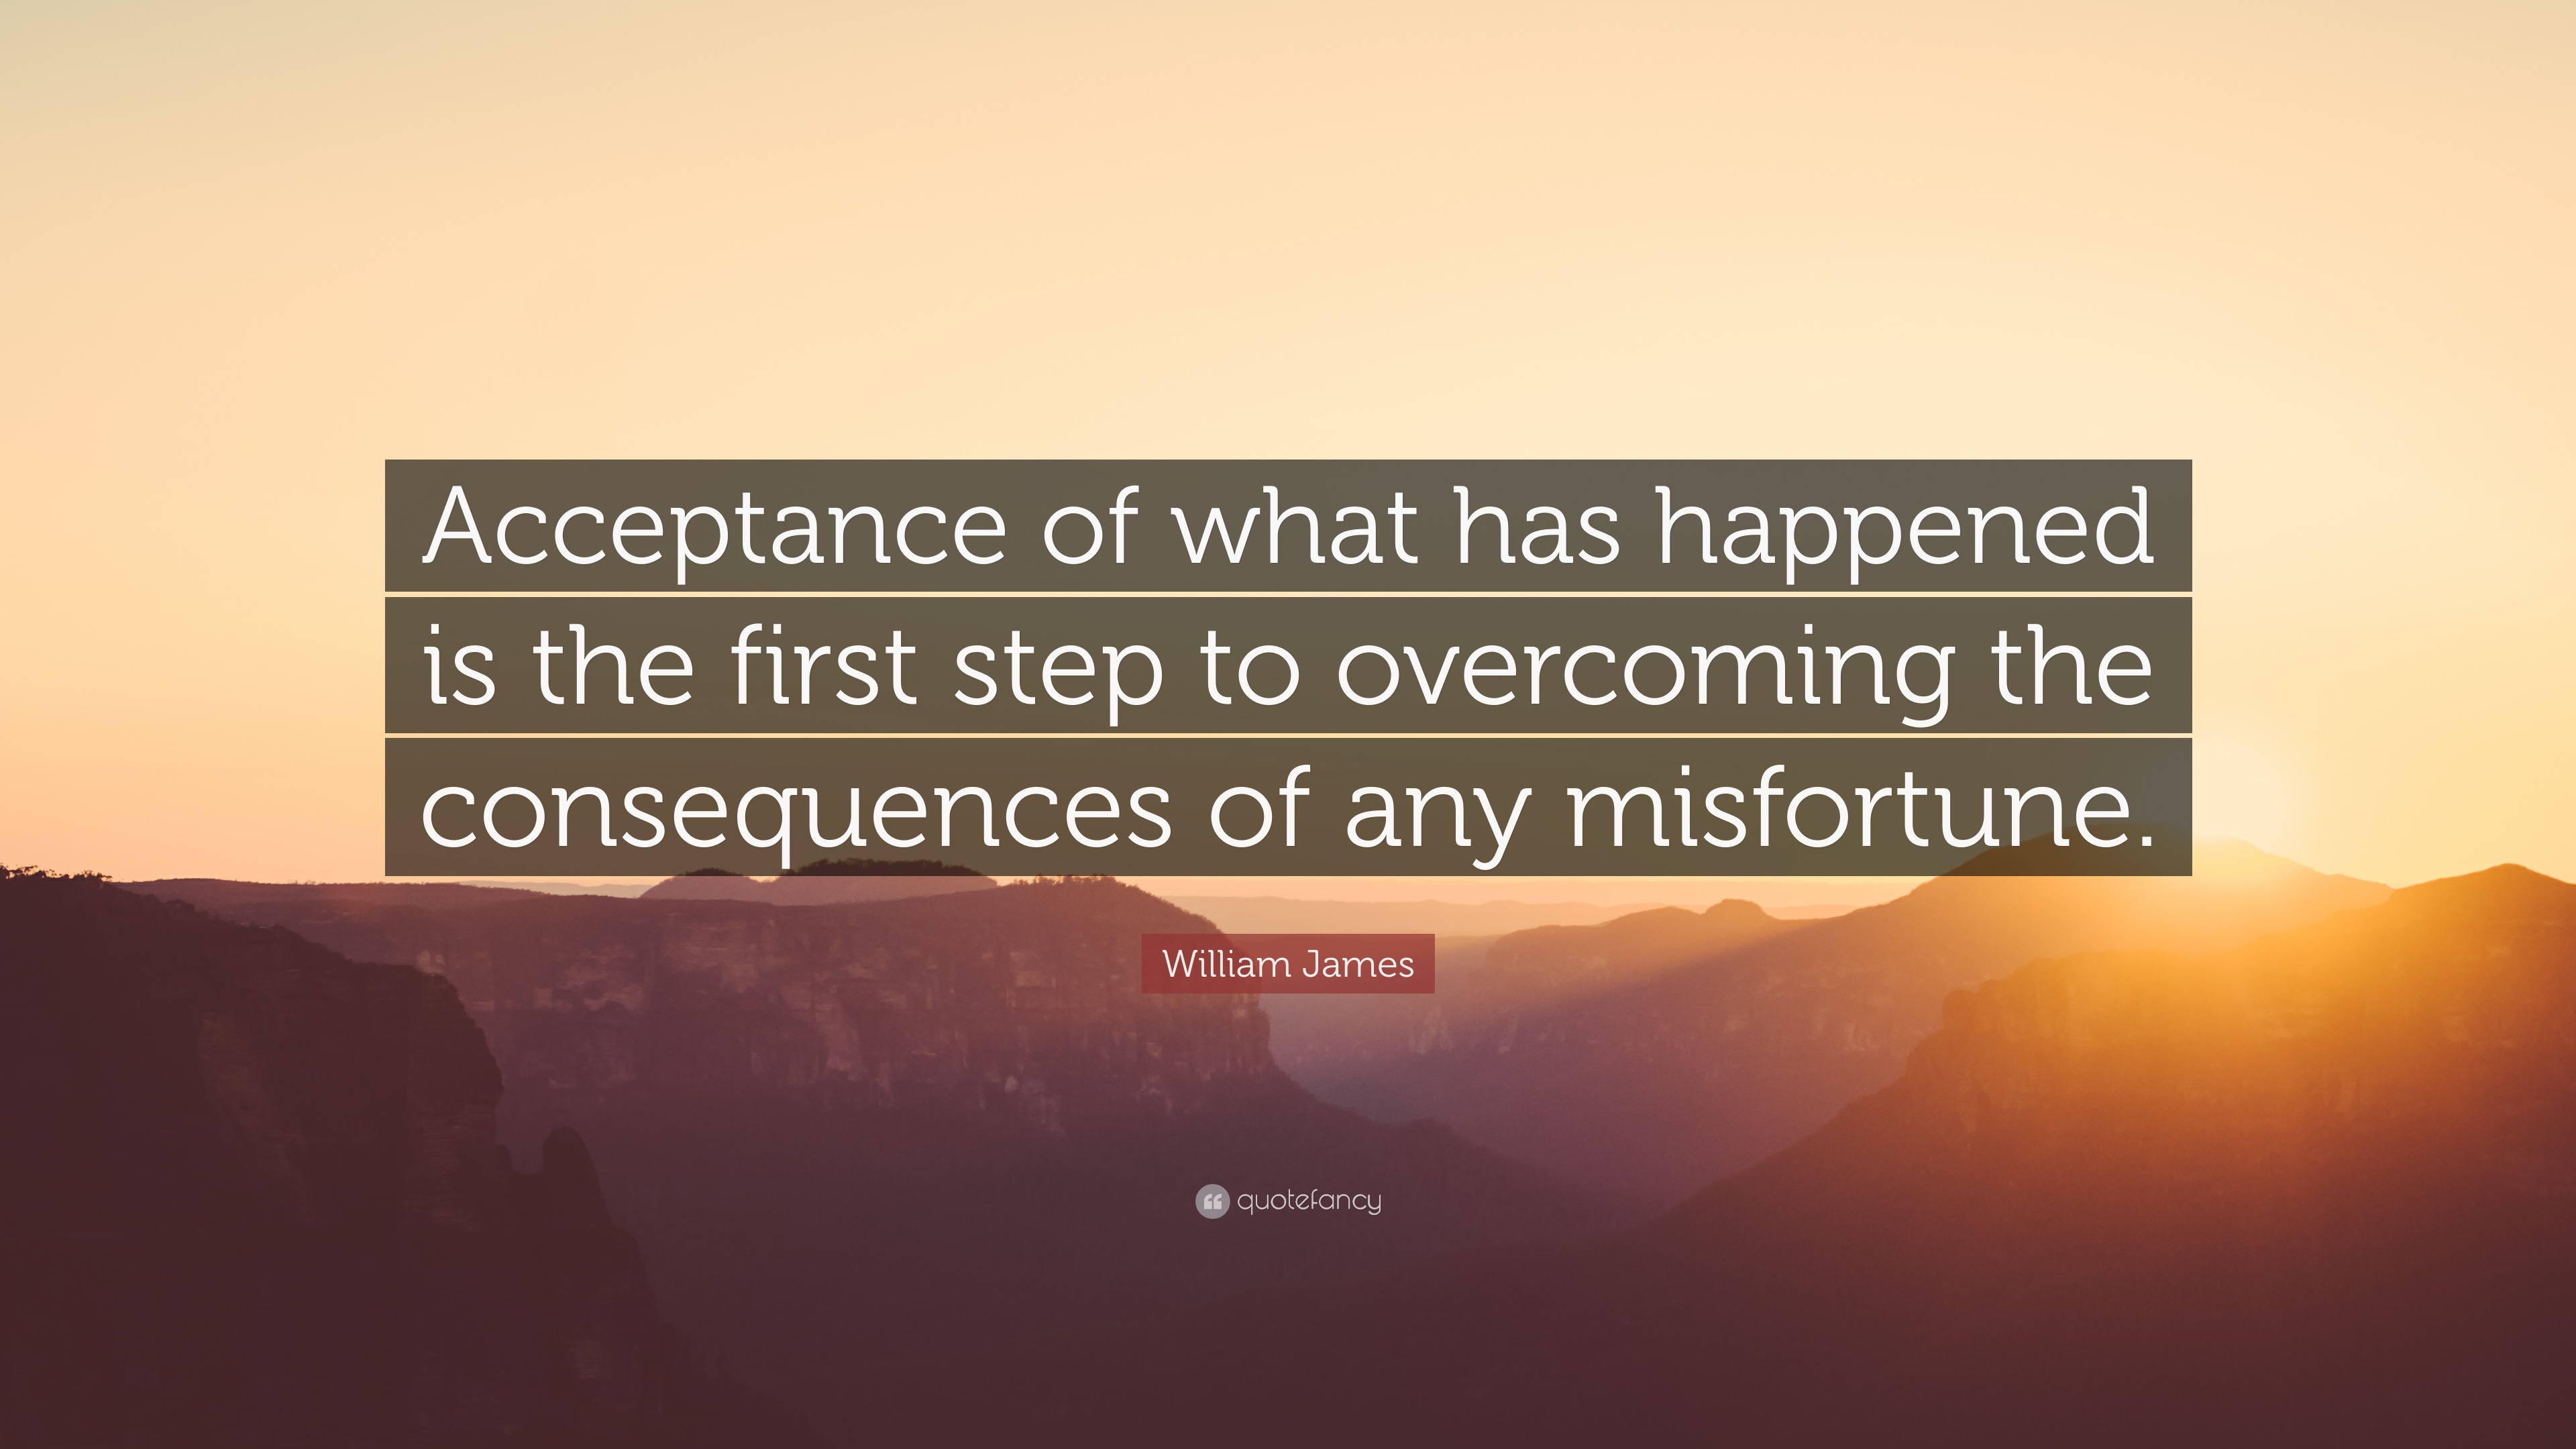 William James Quote: “Acceptance of what has happened is the first step ...